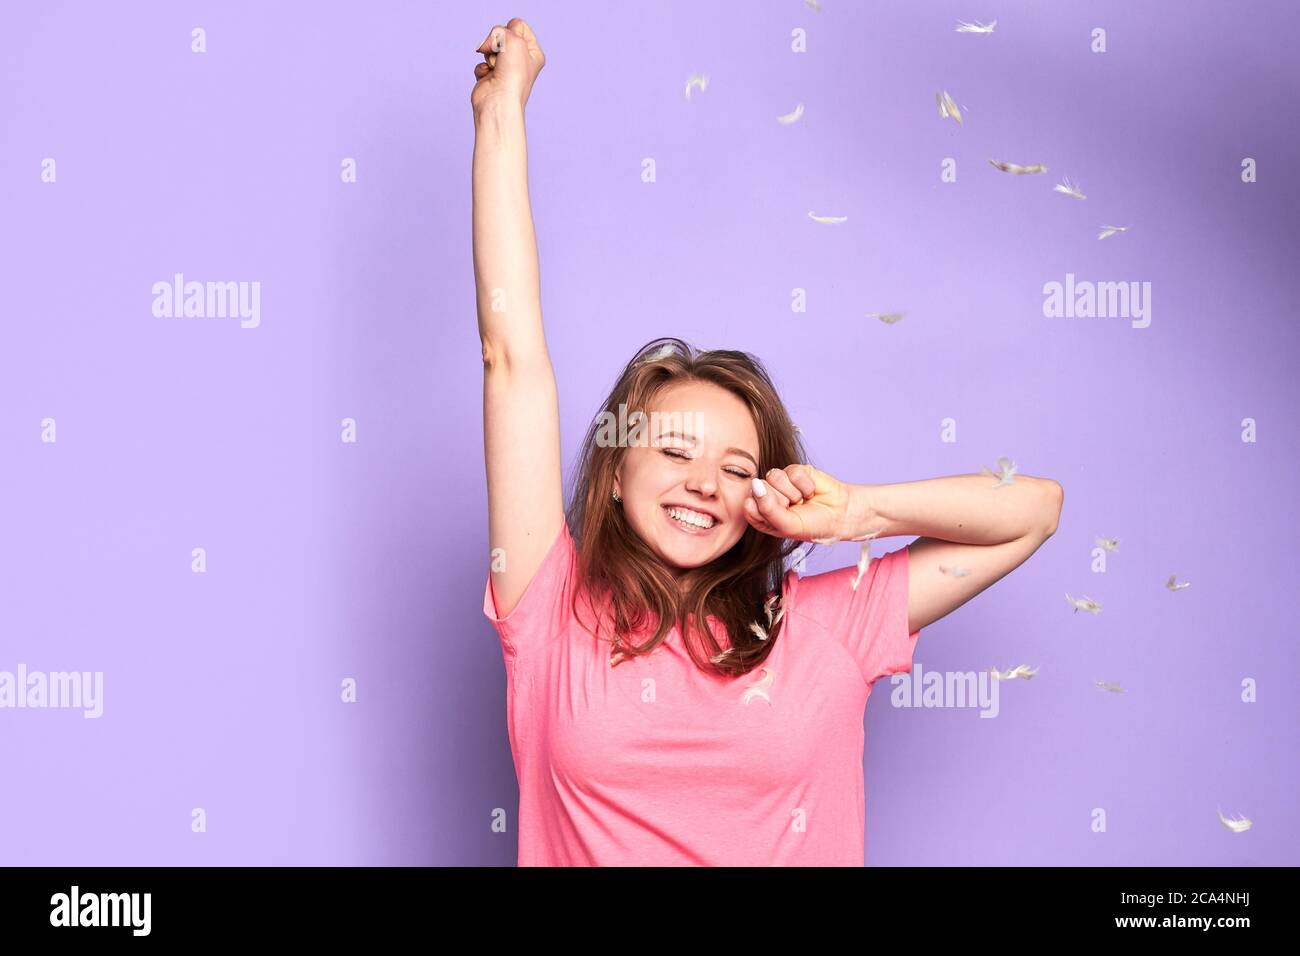 Front view of happy cute girl dancing under flying feathers with closed eyes during pillow fight party with her friends, feeling playful and joyful em Stock Photo